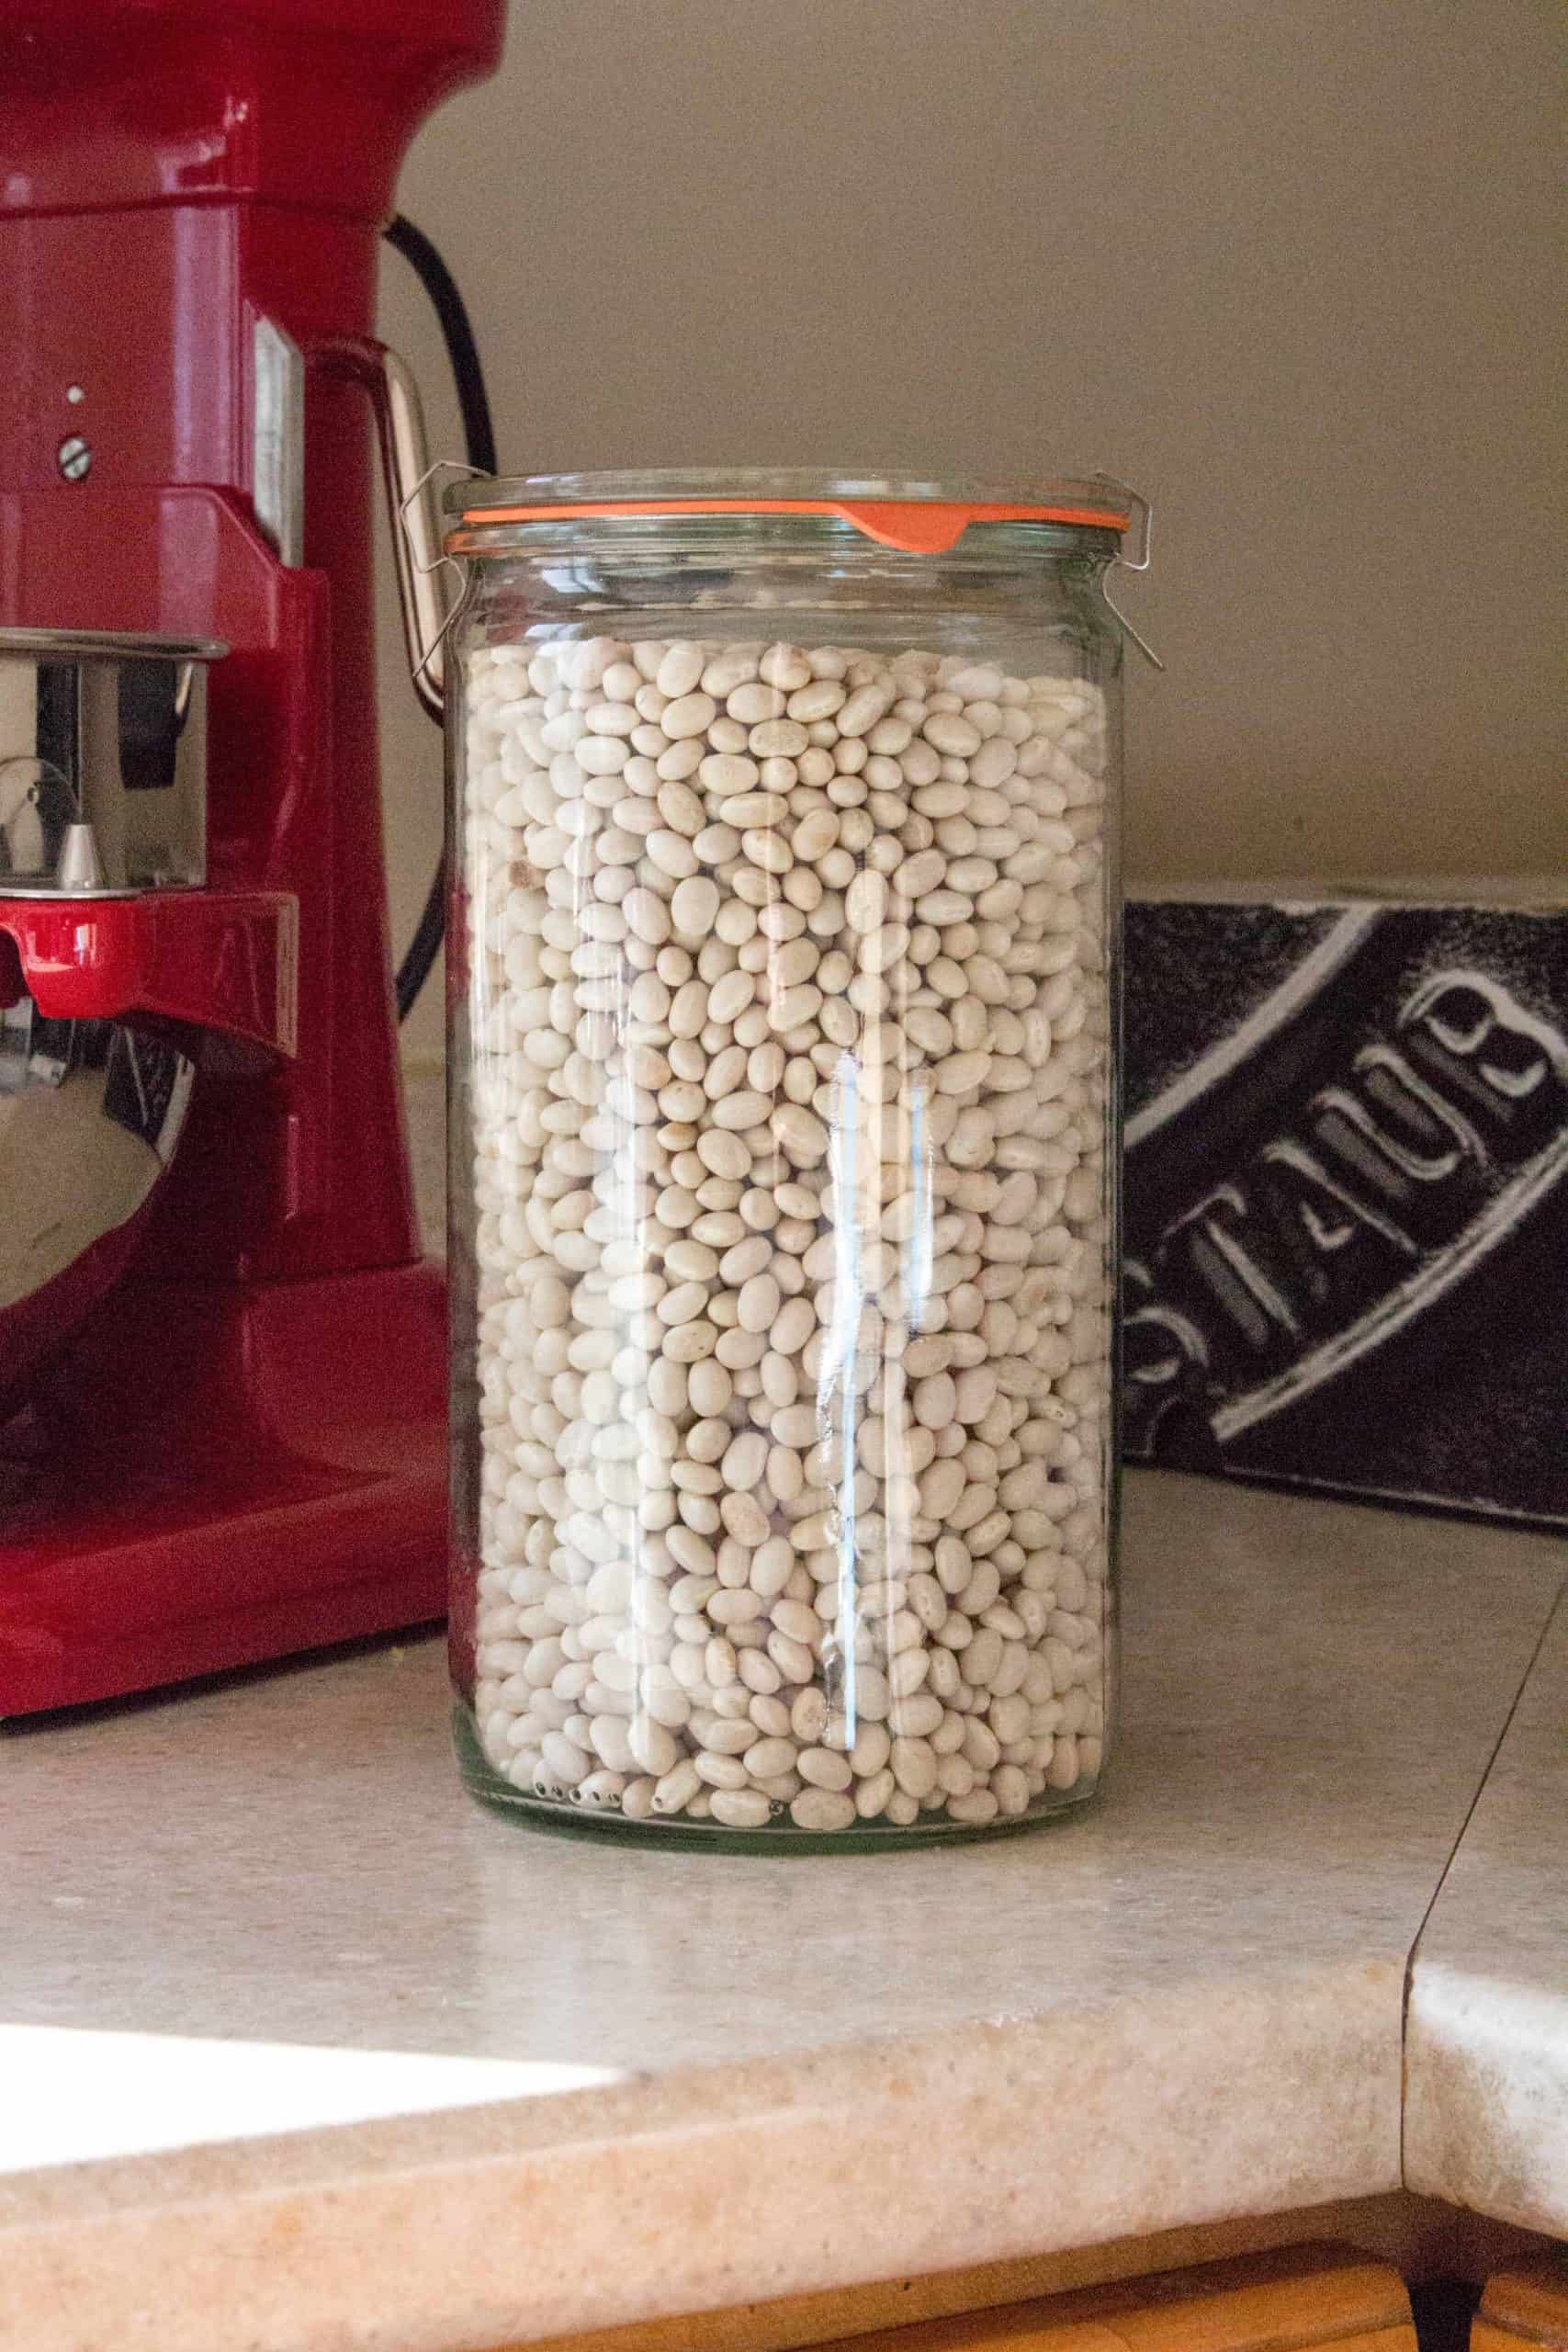 dried navy beans in a glass container